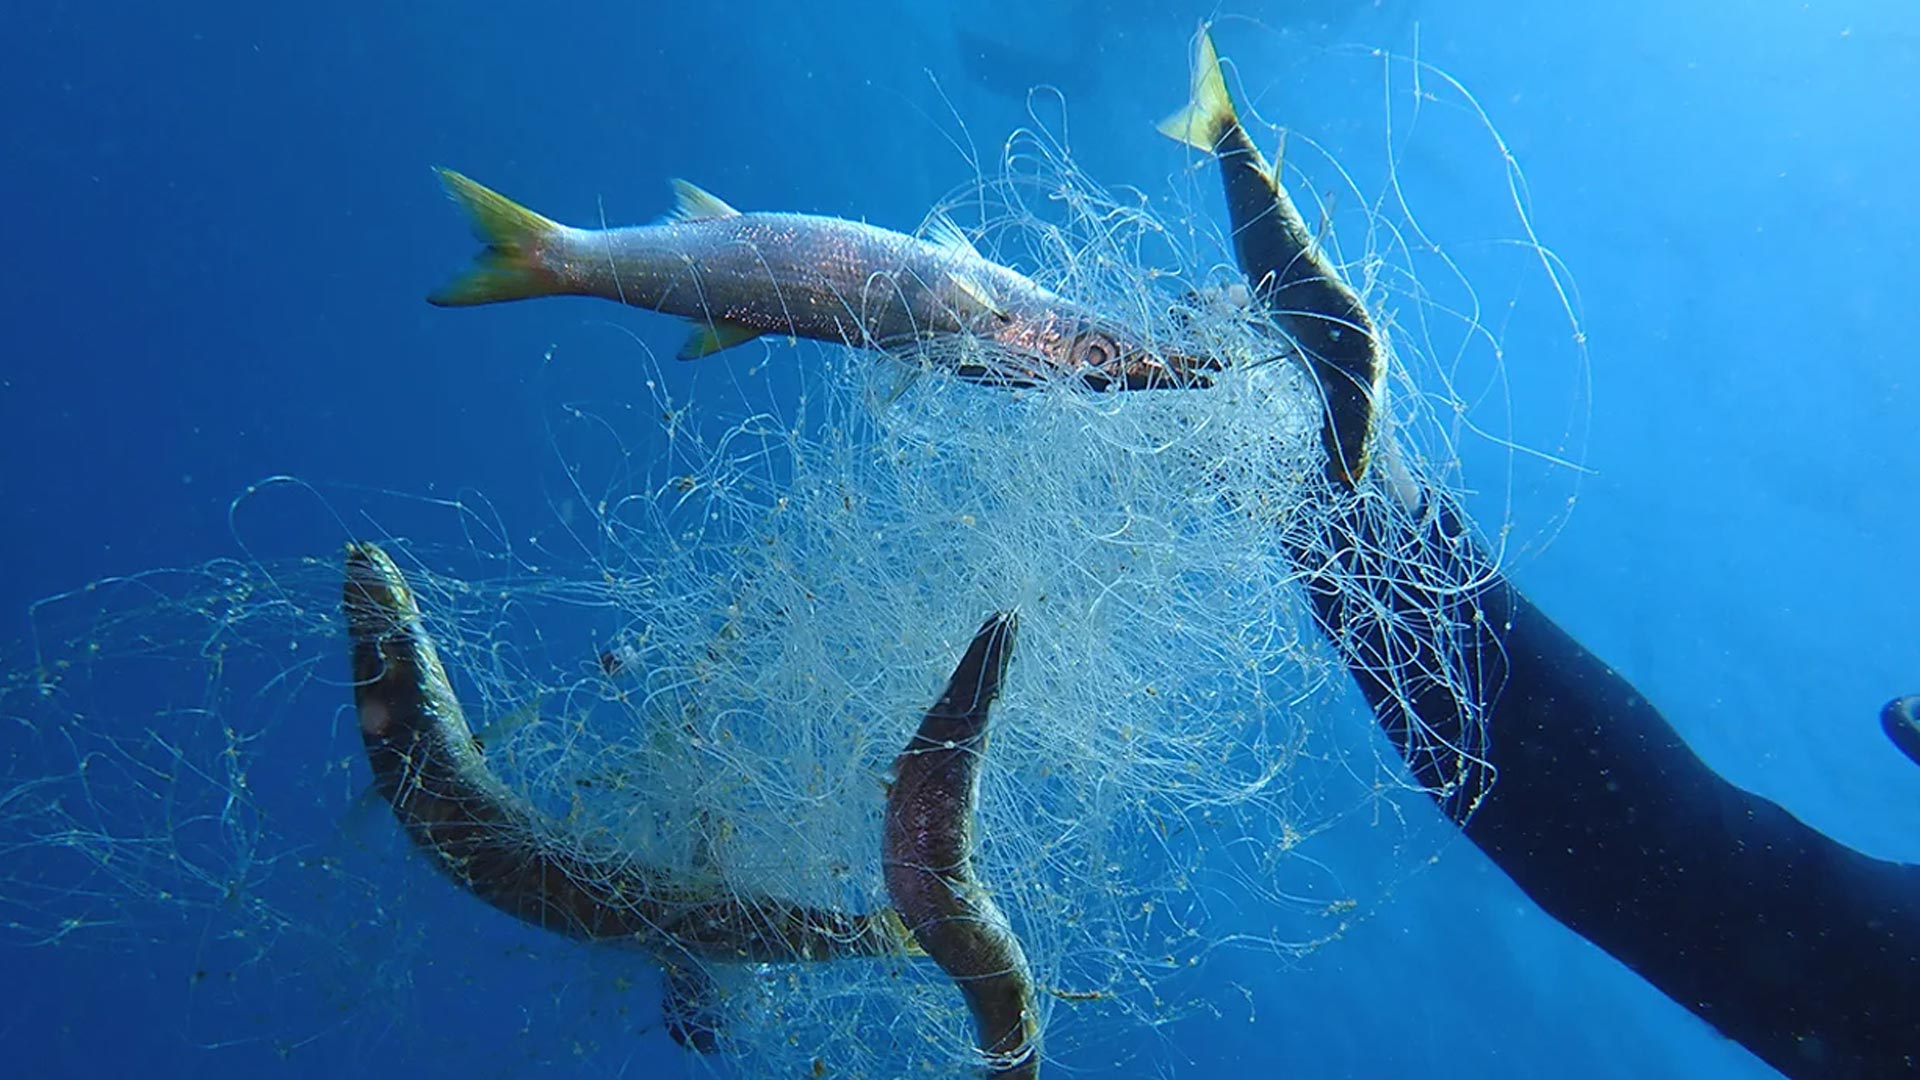 ENT ends the project “Global Ghost Gear Initiative” evaluation